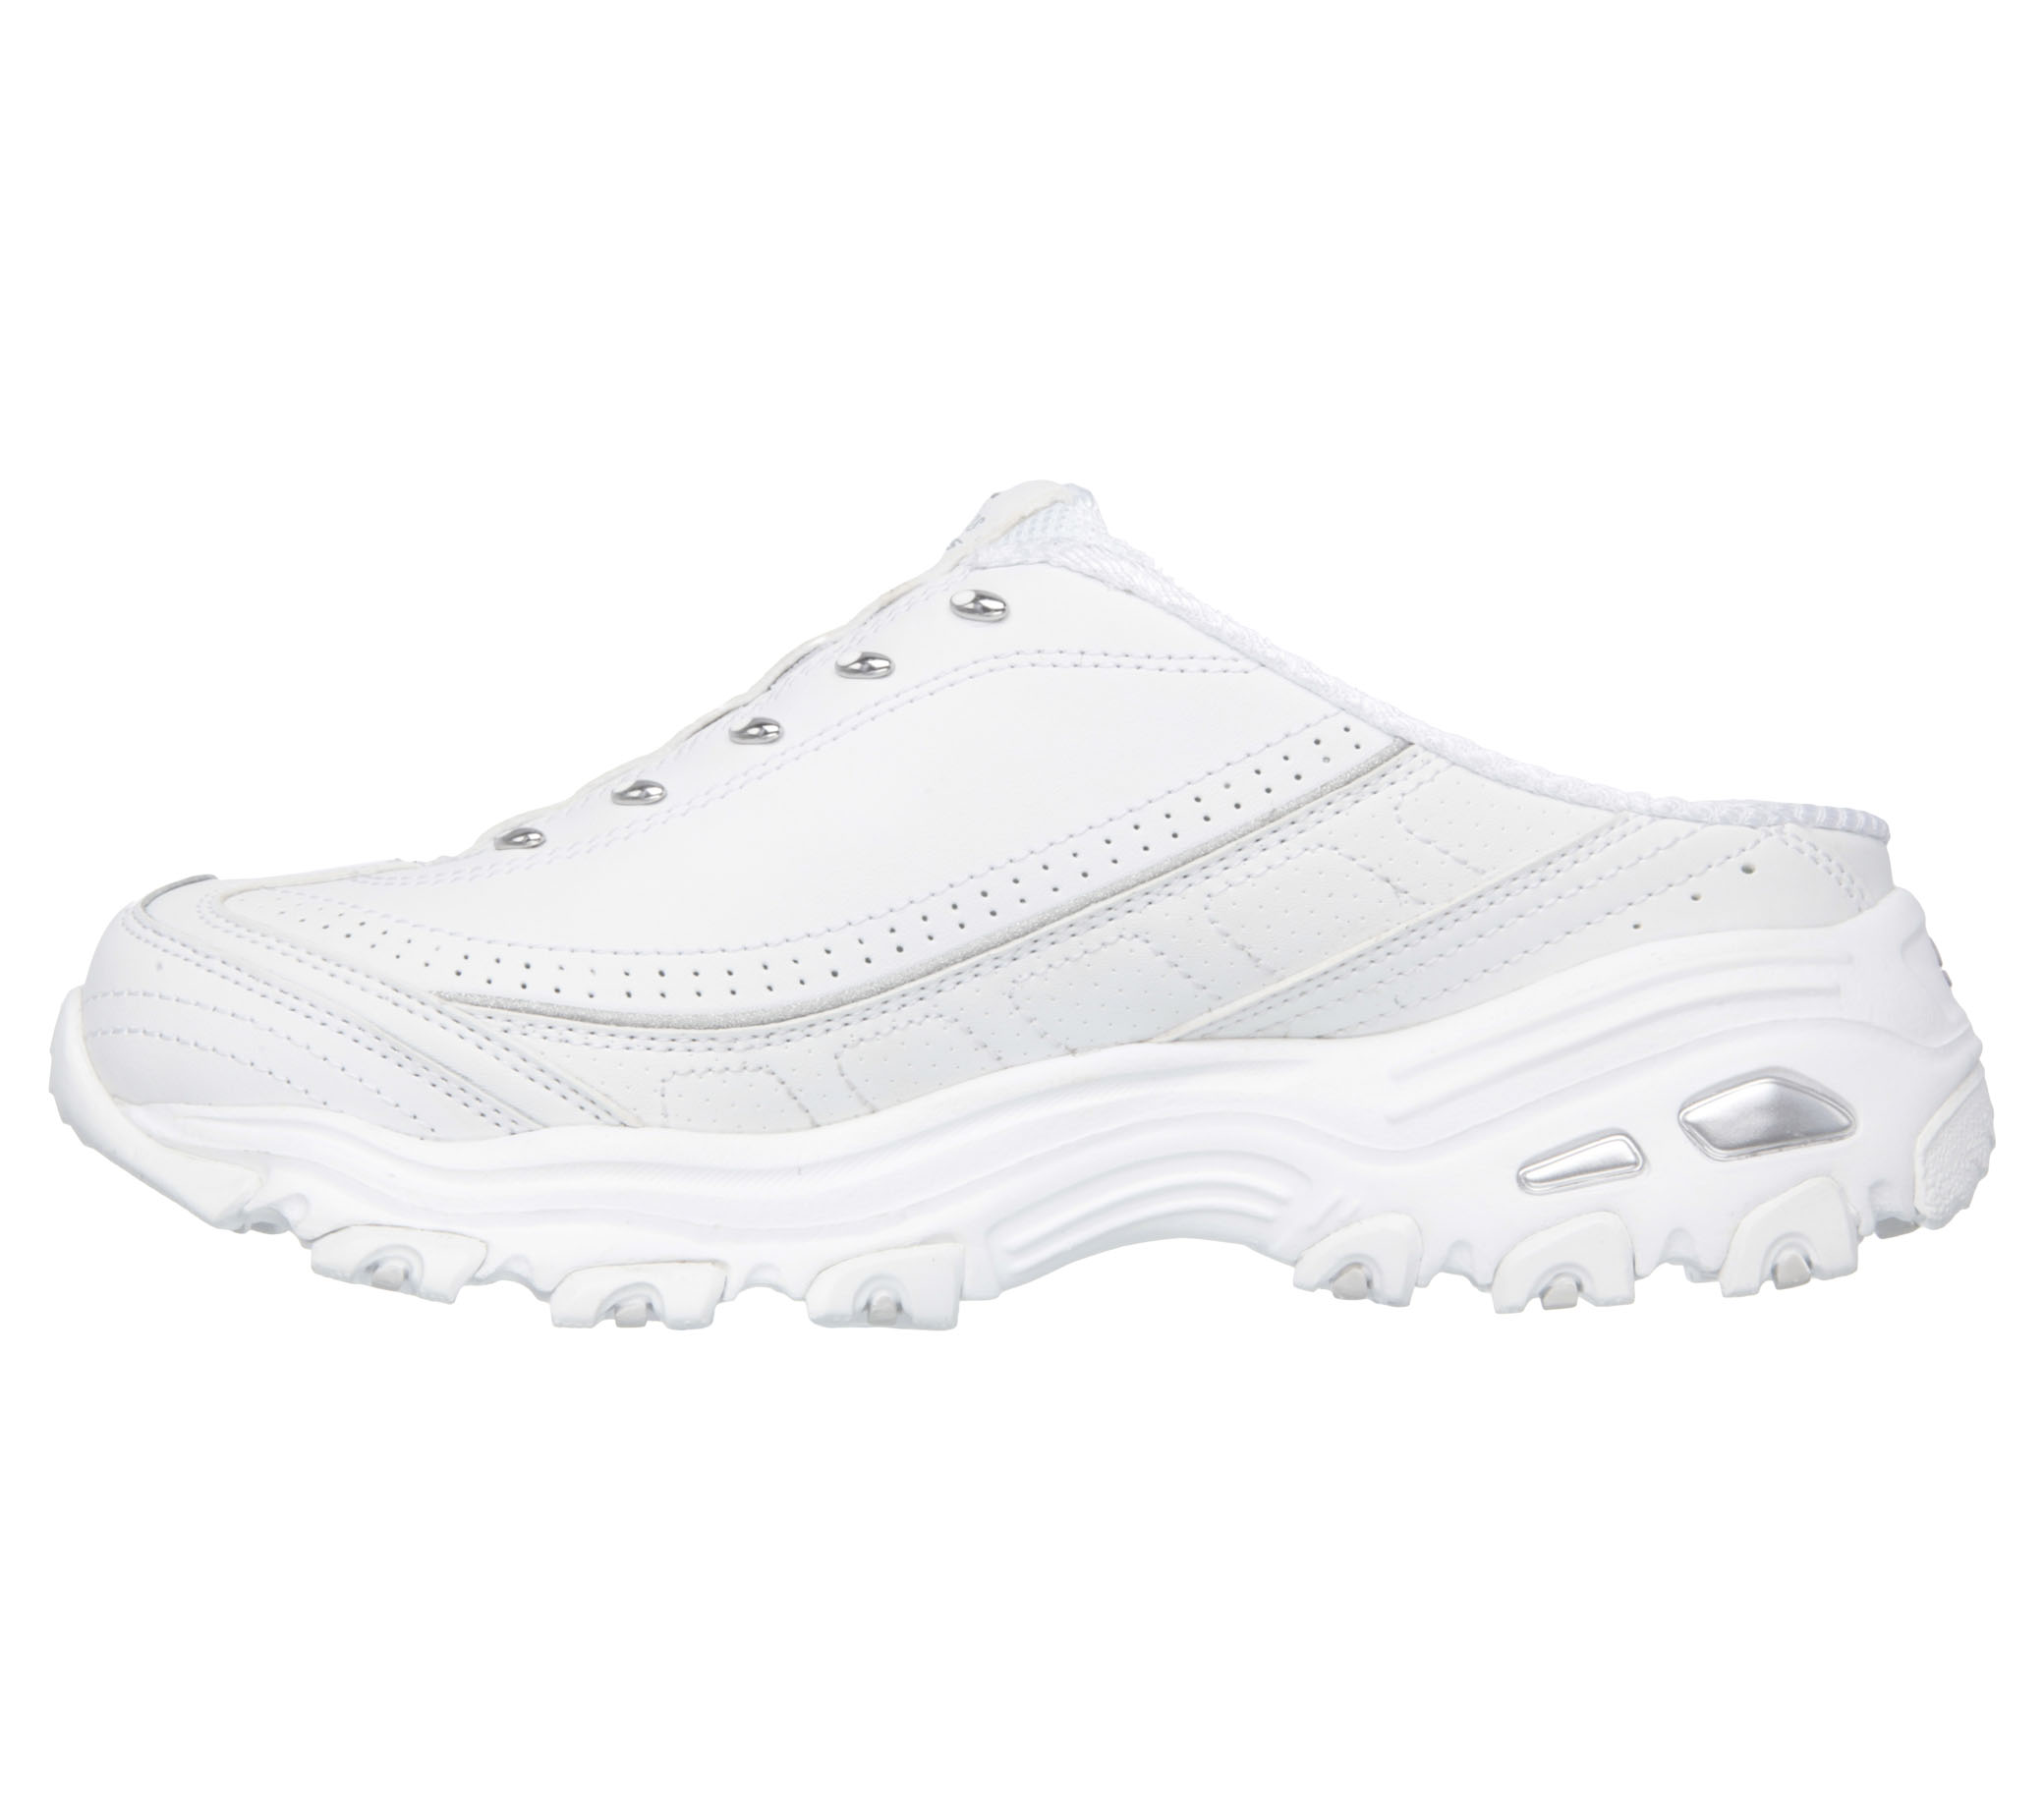 SKECHERS - SKECHERS D'LITES - GLAMOUR FEELS A popular classic sneaker style  gets a fashionable new look with the SKECHERS D'Lites - Glamour Feels shoe.  Smooth leather and metallic synthetic upper in